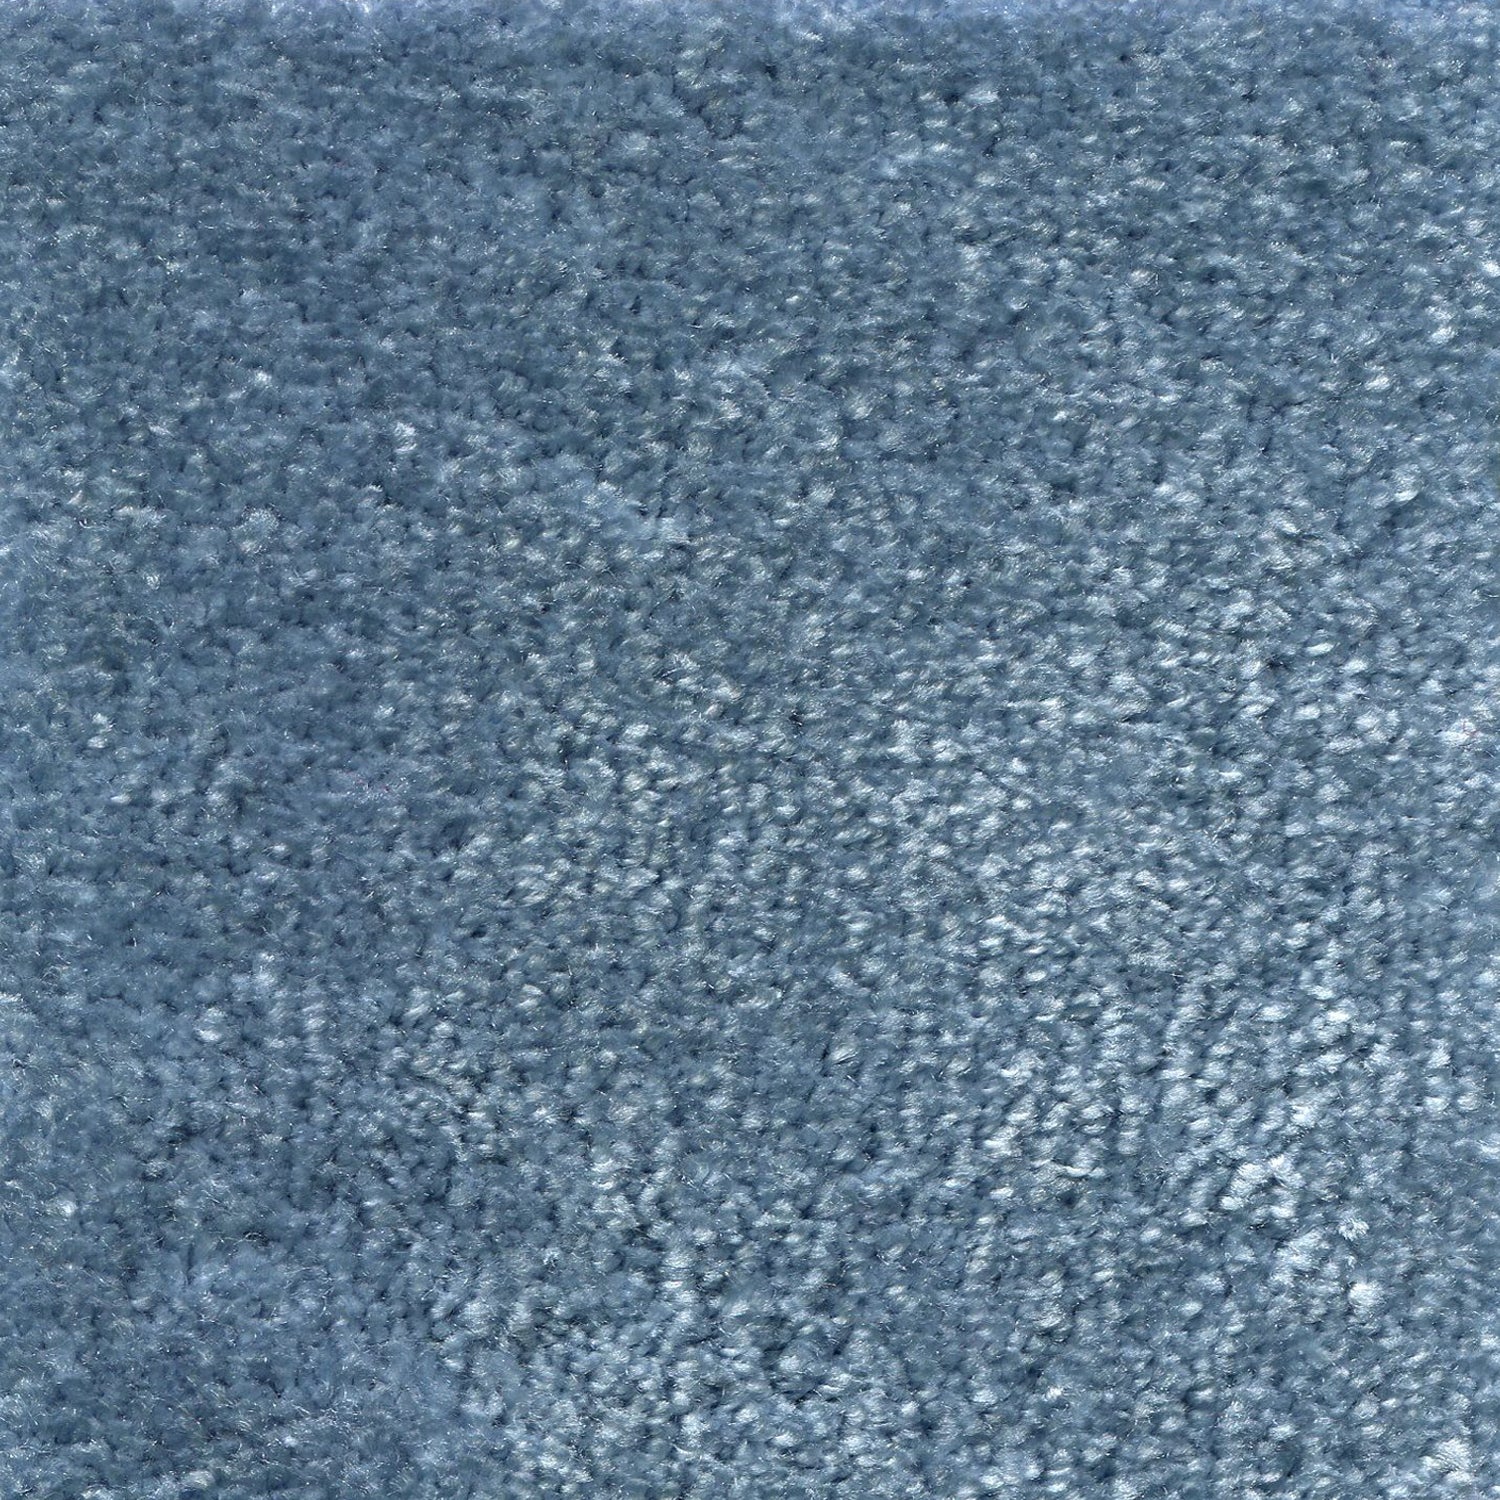 Synthetic blend broadloom carpet swatch in a cut pile texture in blue.